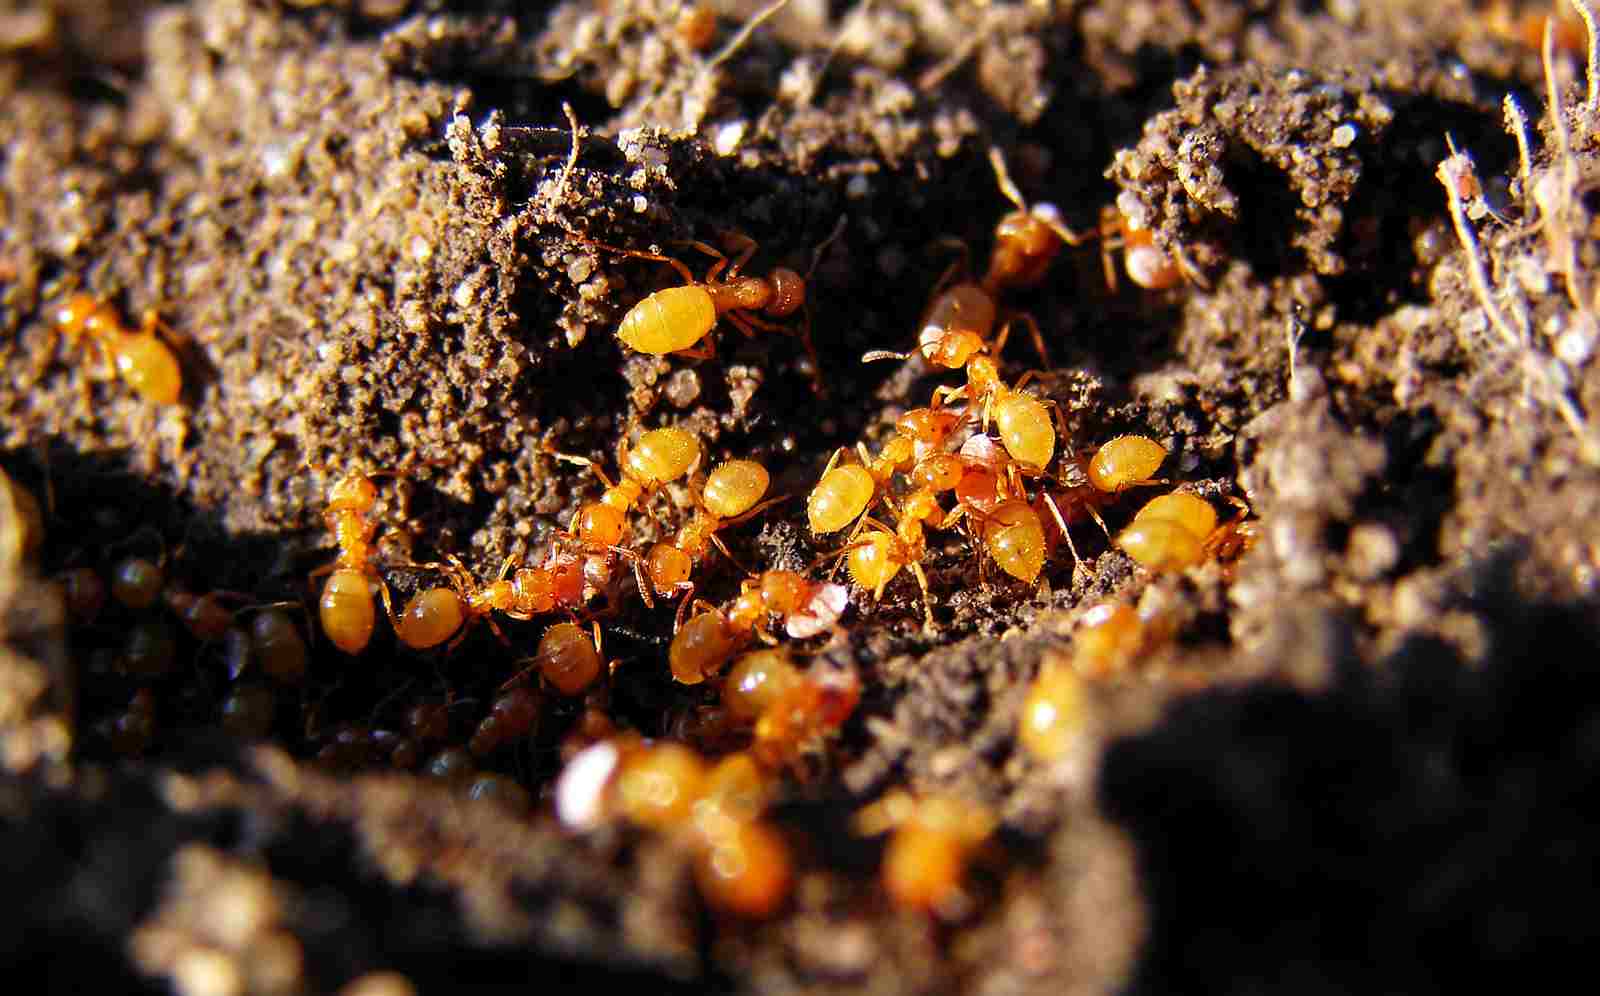 Are Ants Consumers: Ants May Function as Decomposers Through Detritivorous Feeding and Soil Conservation (Credit: Matt Reinbold 2007 .CC BY-SA 2.0.)